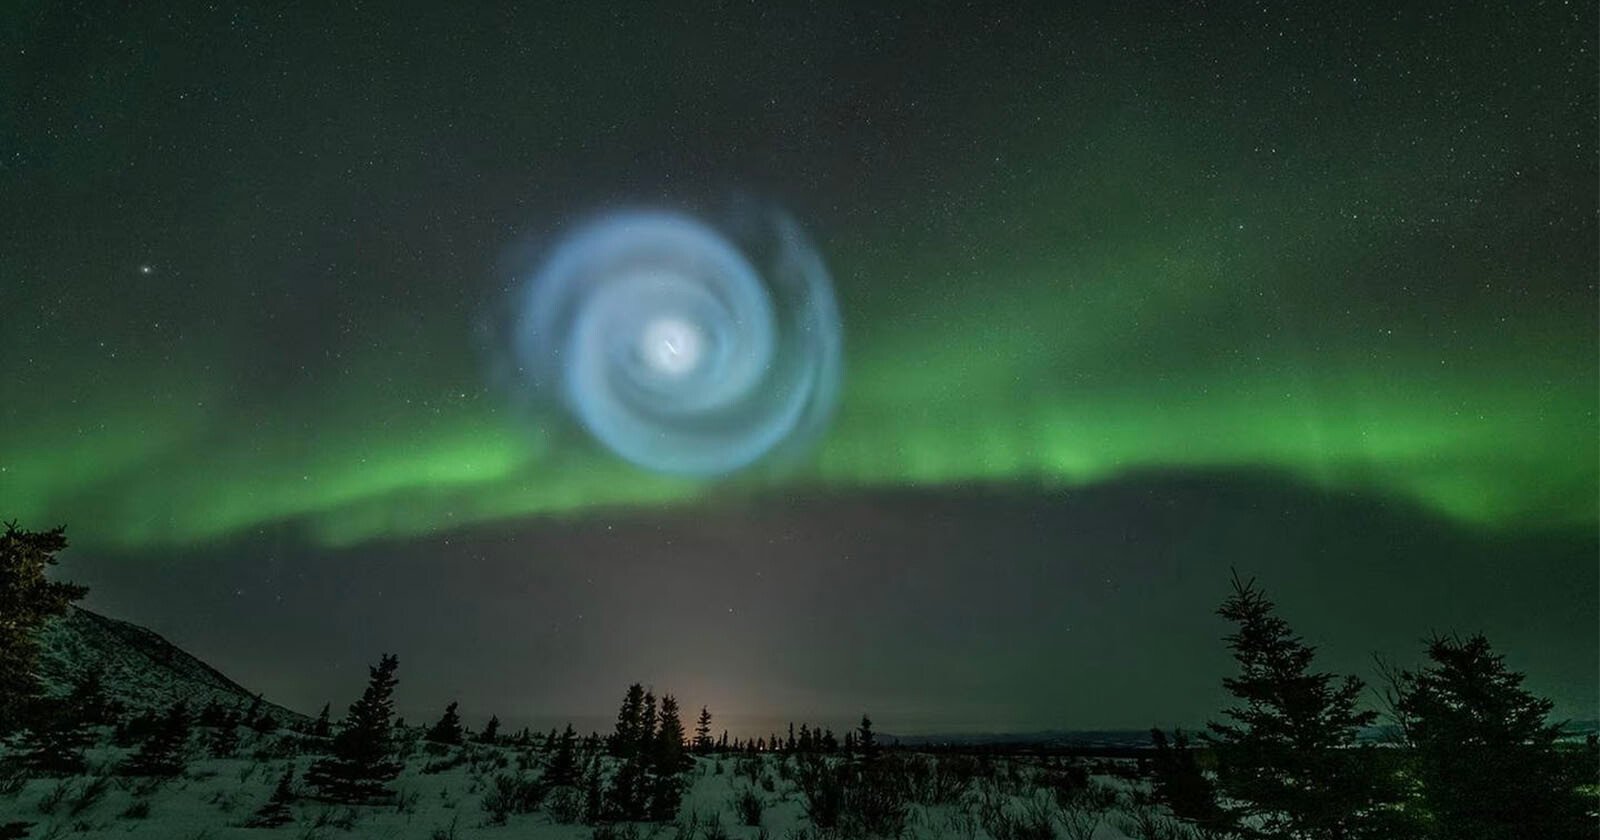 Giant Spiral Appears Amid the Aurora Lights in Alaskas Night Sky